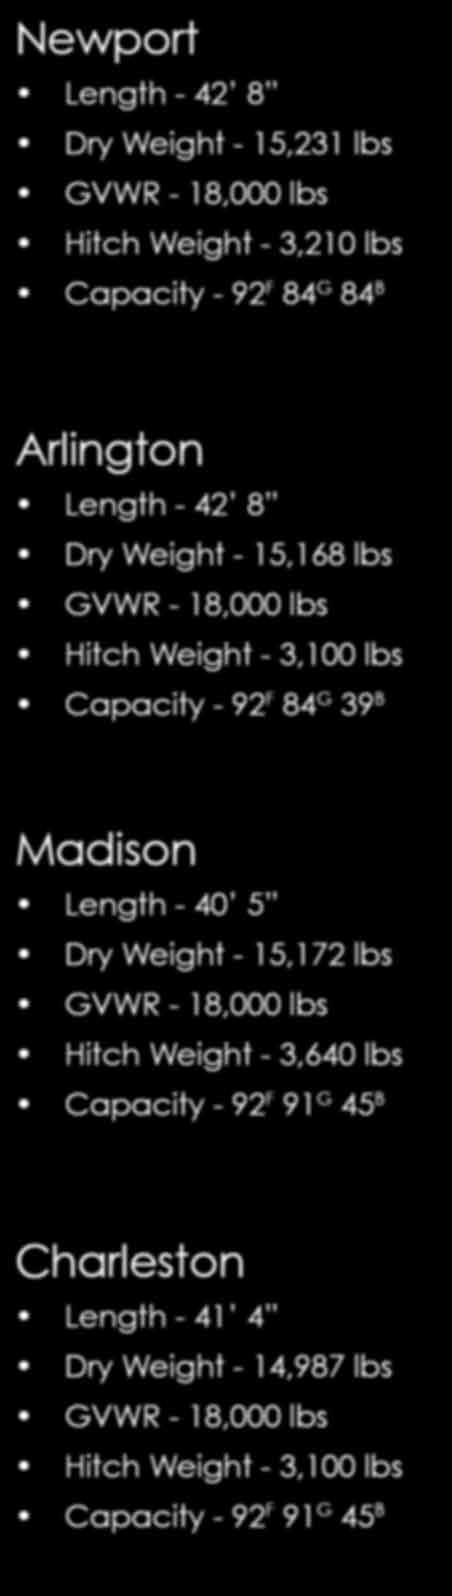 ARLINGTON Length - 42 8 Dry Weight - 15,168 lbs Hitch Weight - 3,100 lbs Capacity - 92F 84G 39B Madison or Wardrobe Length - 40 5 Dry Weight - 15,172 lbs Hitch